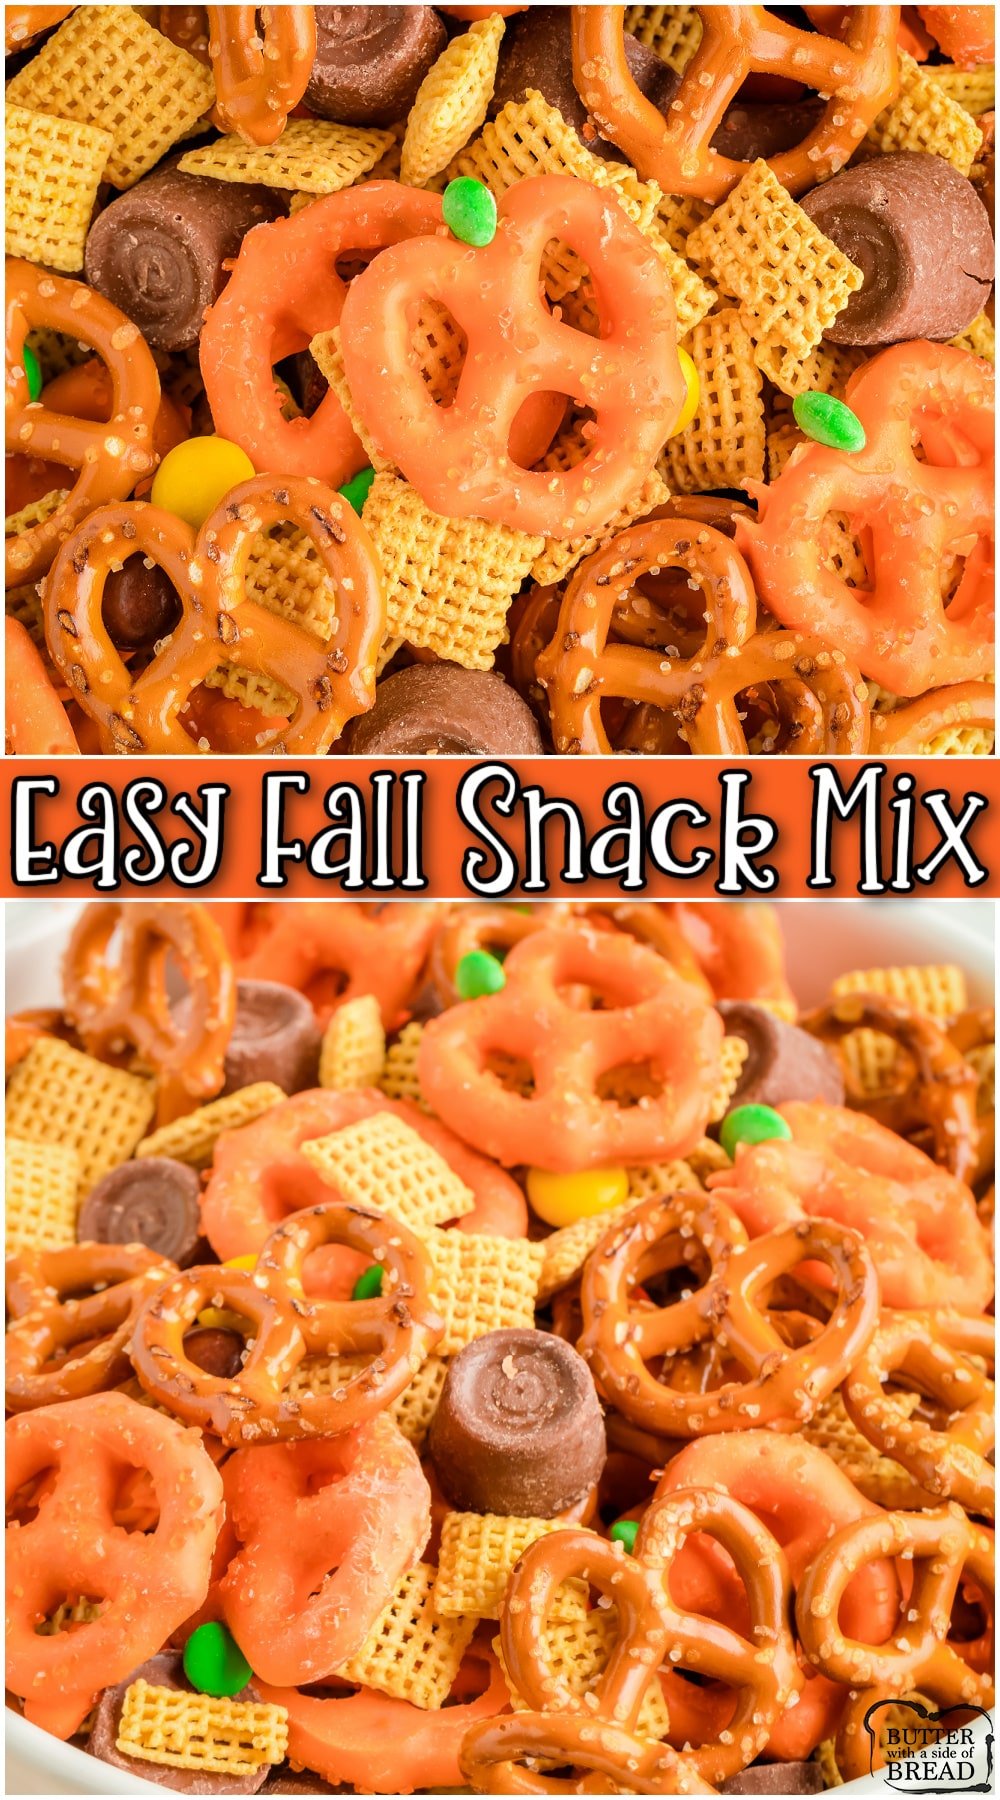 Easy Halloween Snack Mix is a sweet & salty treat perfect for parties! You'll need pretzels, chocolate & Chex cereal for this easy festive snack mix recipe!